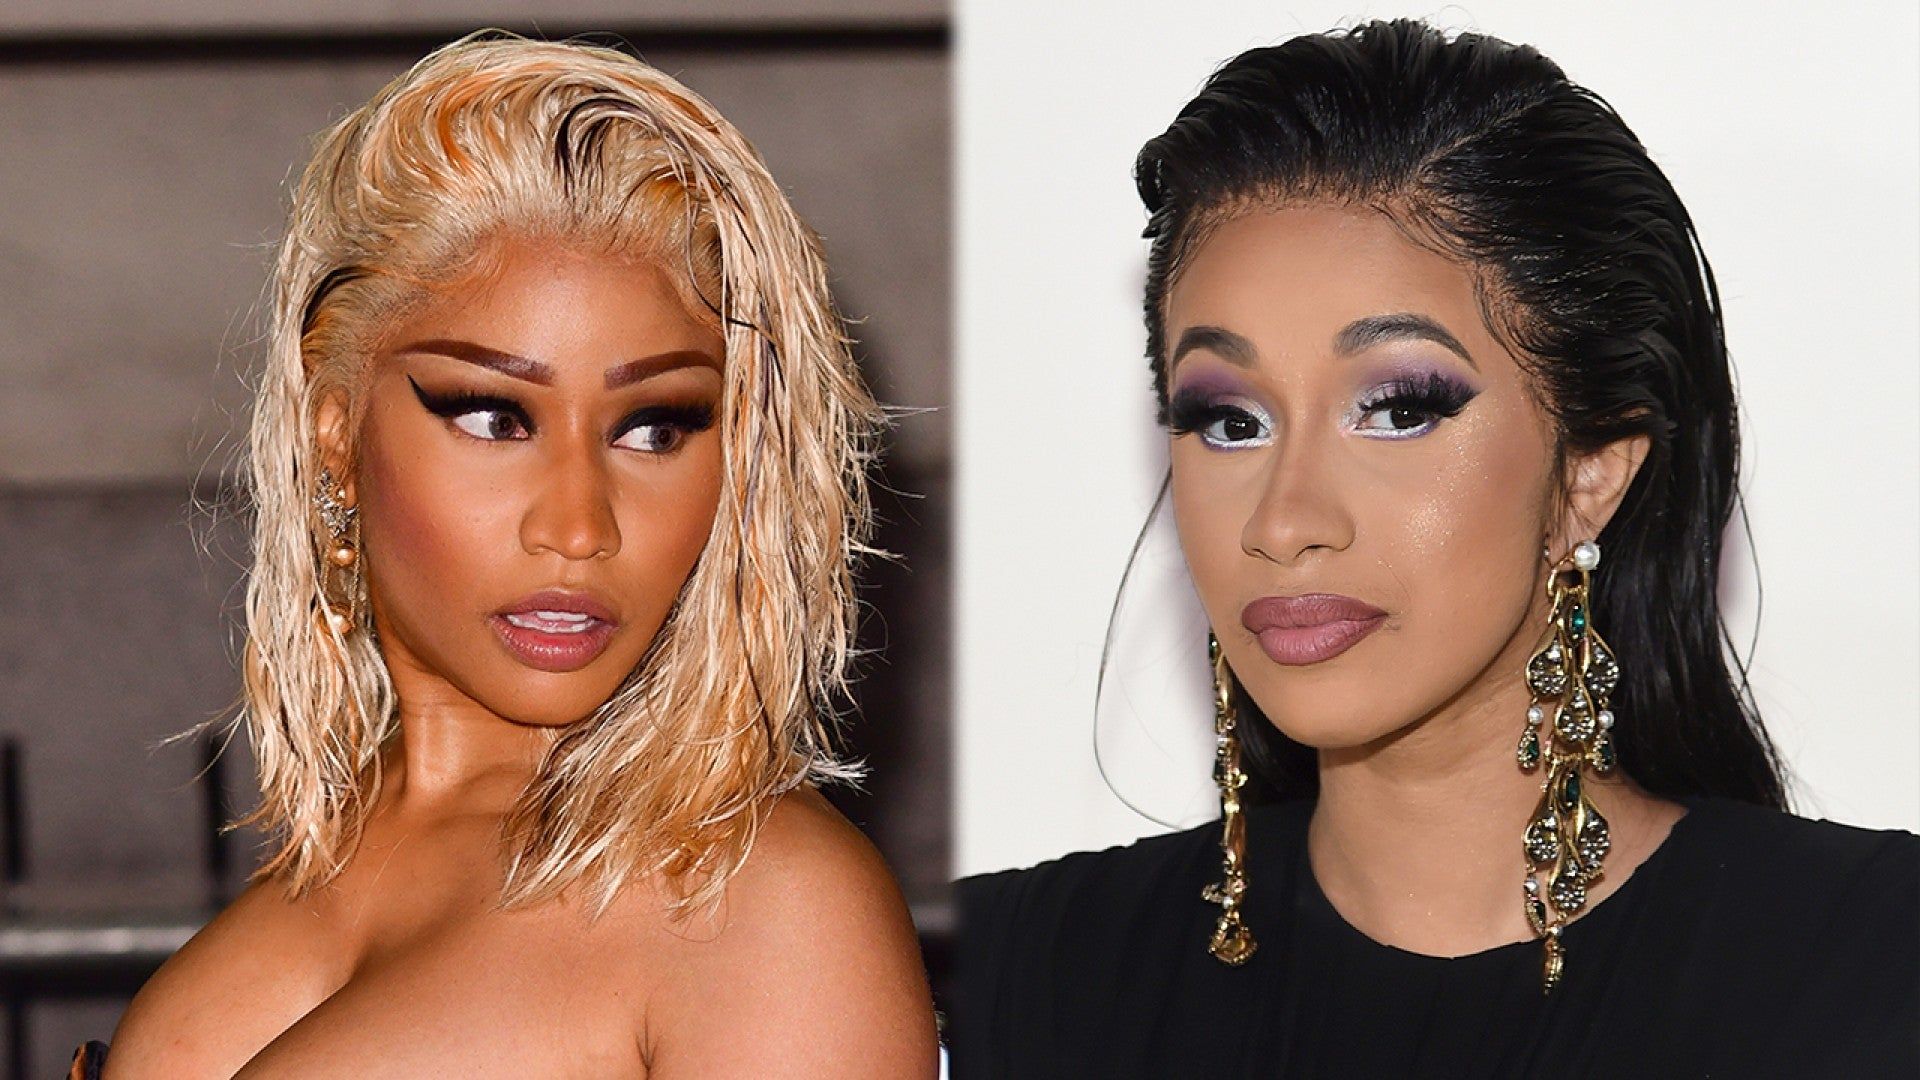 Nicki Minaj Asks for 'Peace' Amid Ongoing Feud With Cardi B - See the Rapper's Response